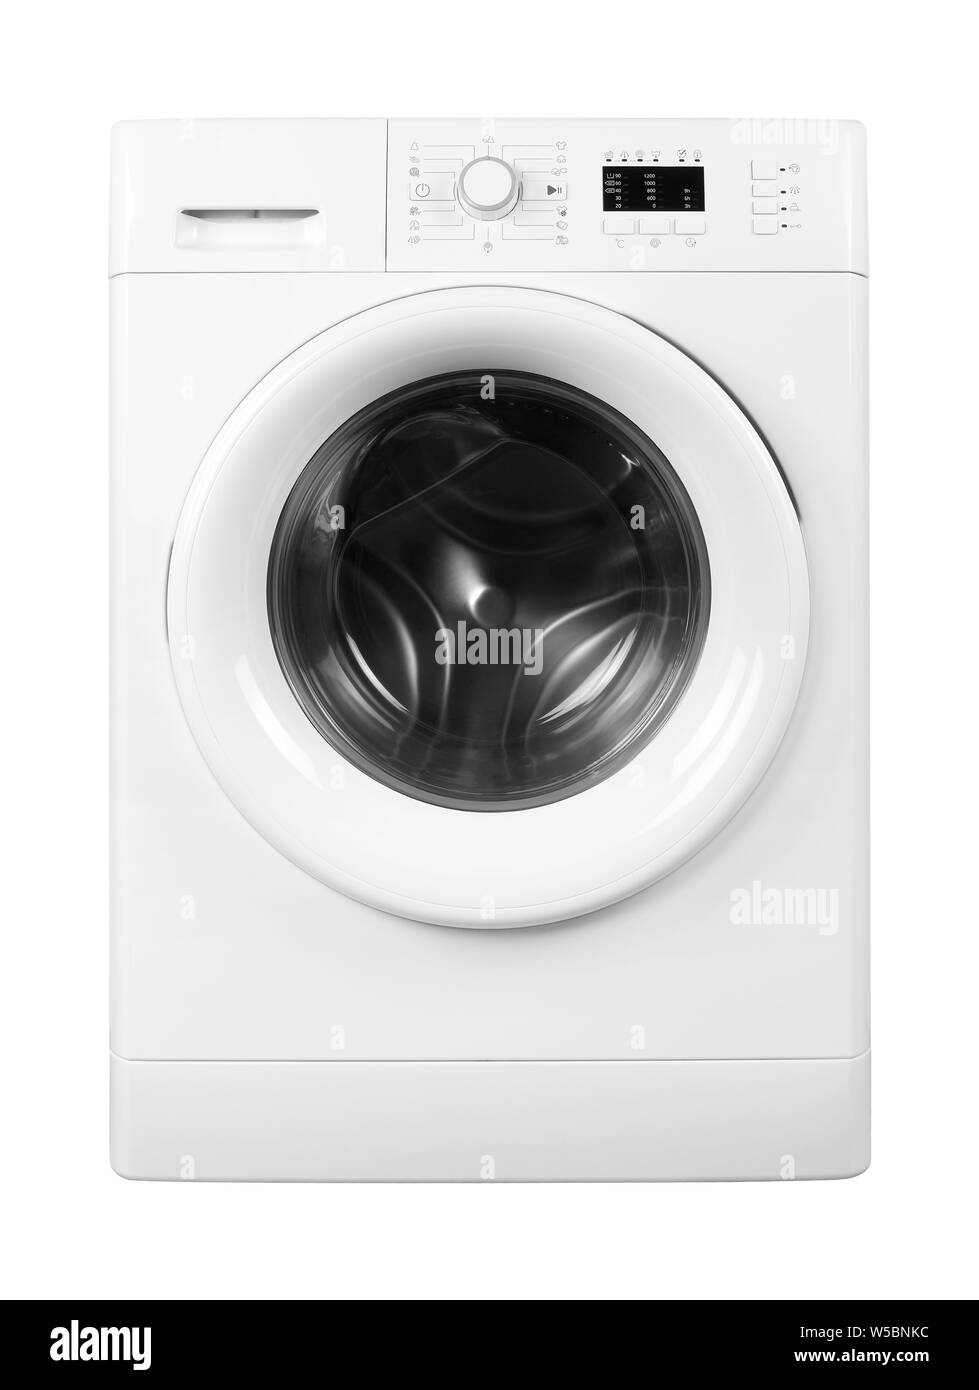 Major appliance - Front view washing machine on a white background Stock Photo